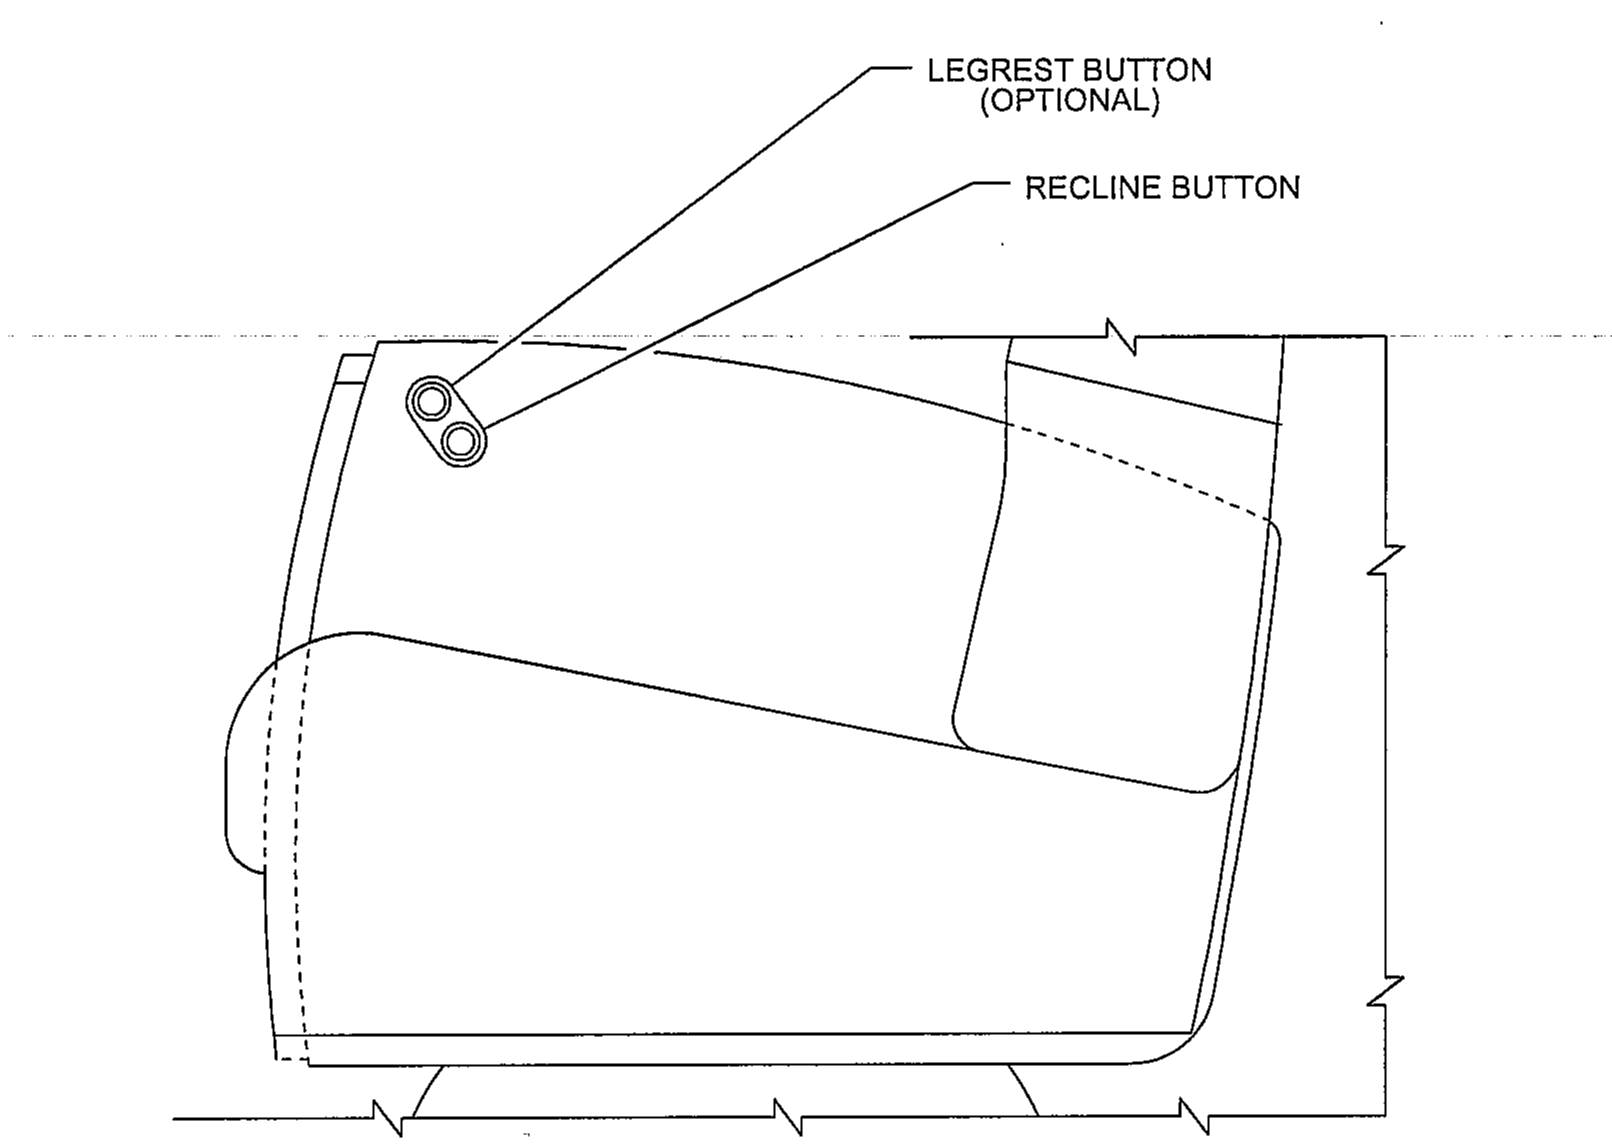 Typical Recline Button